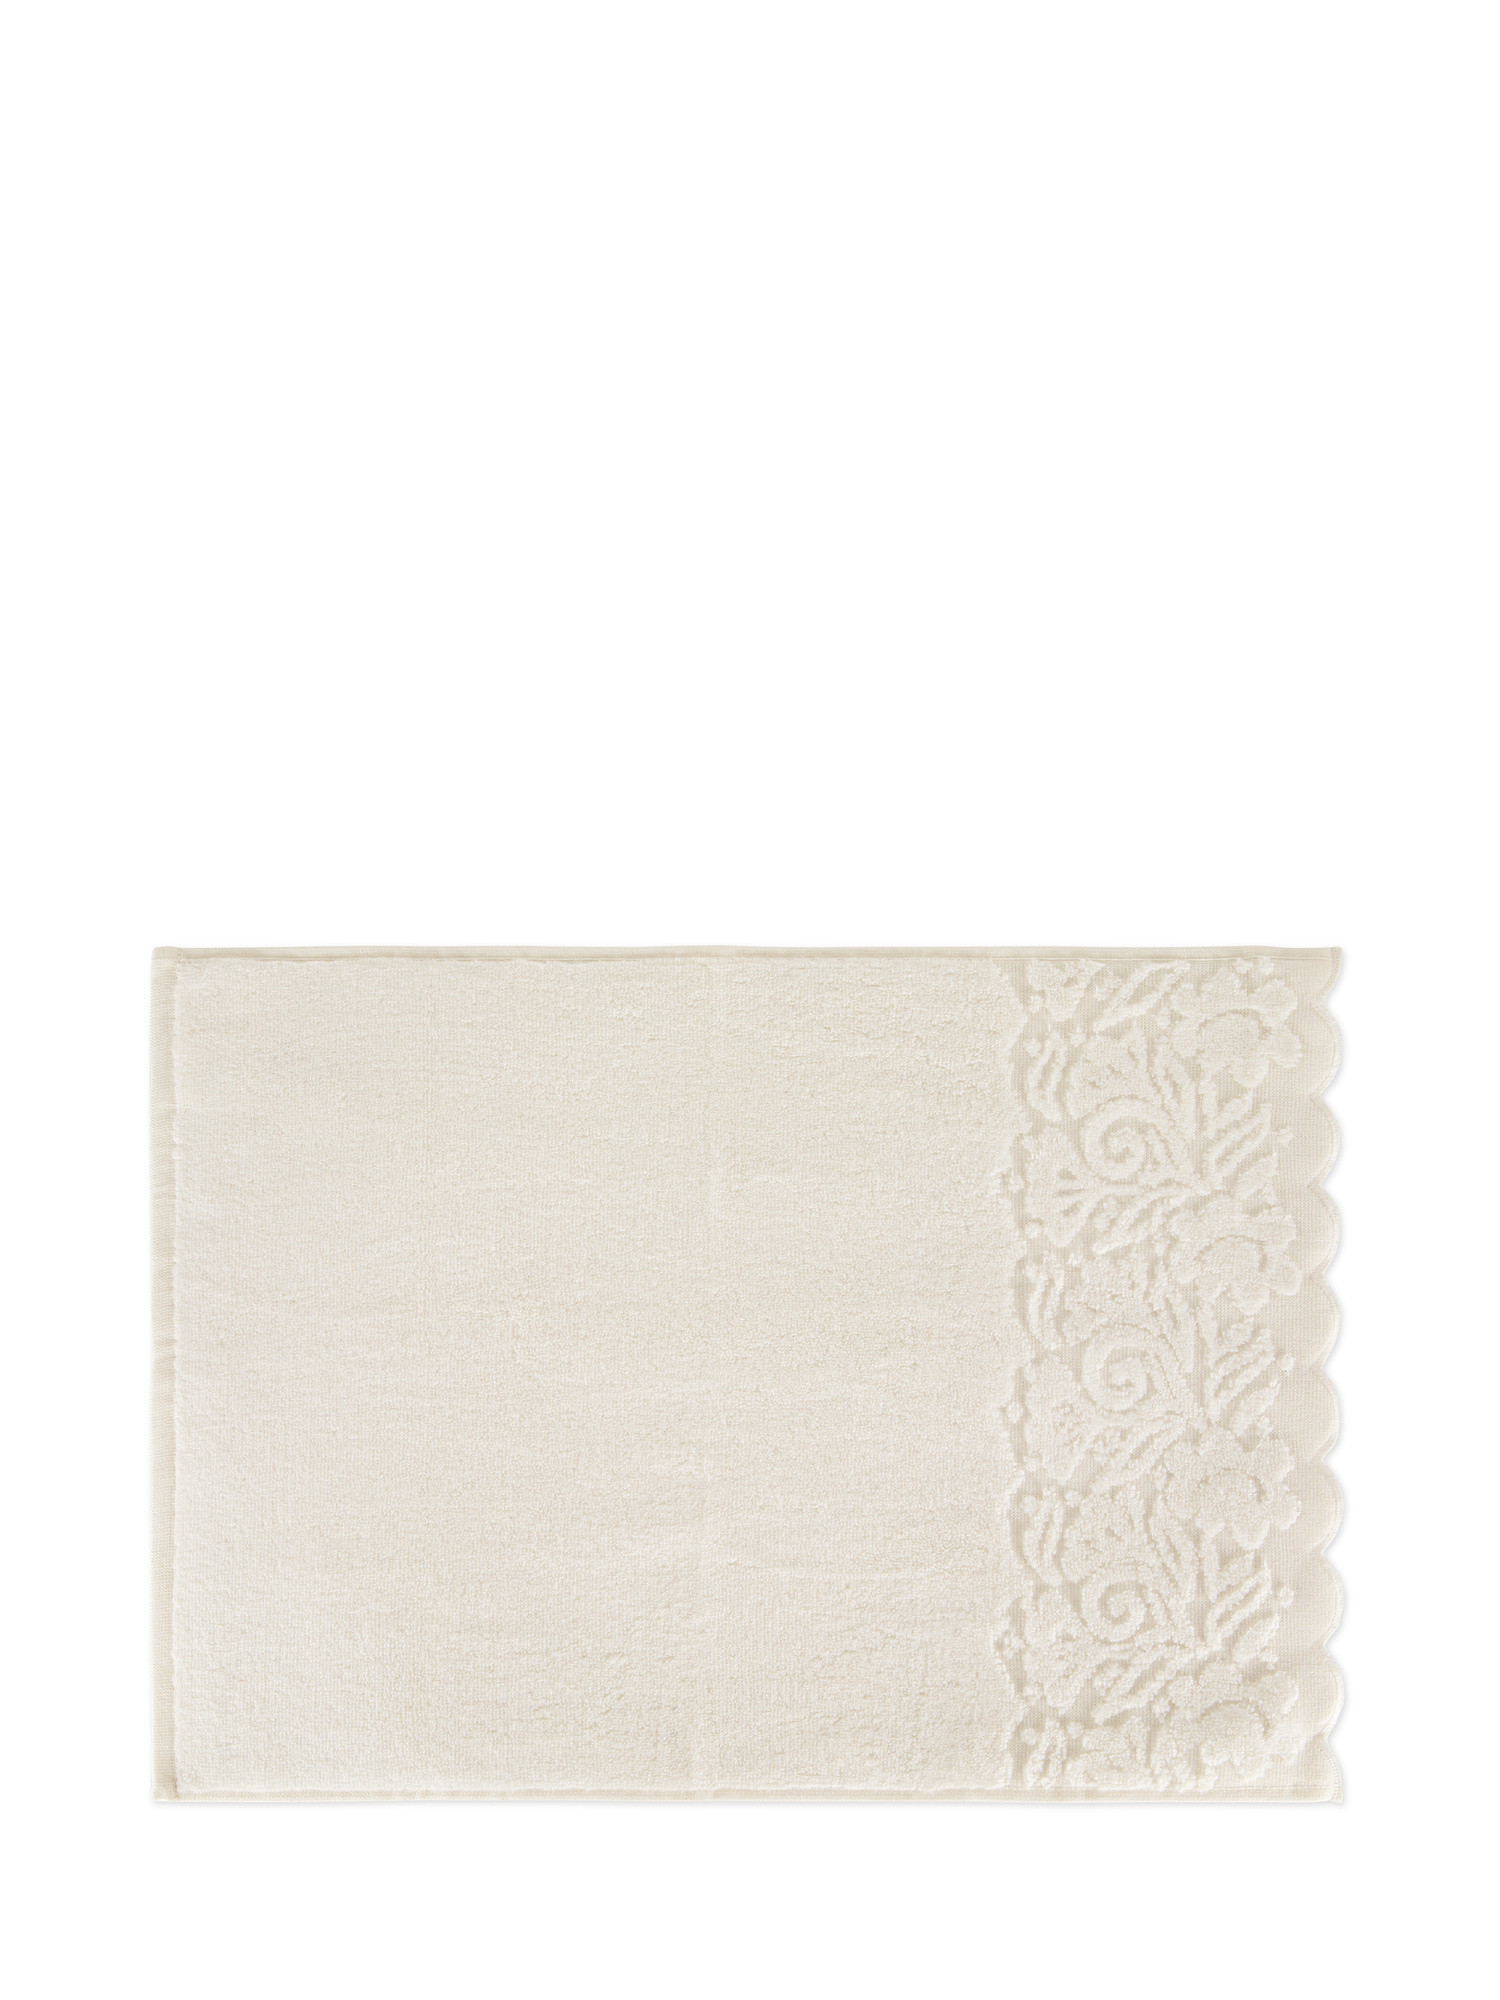 Pure cotton towel with jacquard border, White, large image number 1